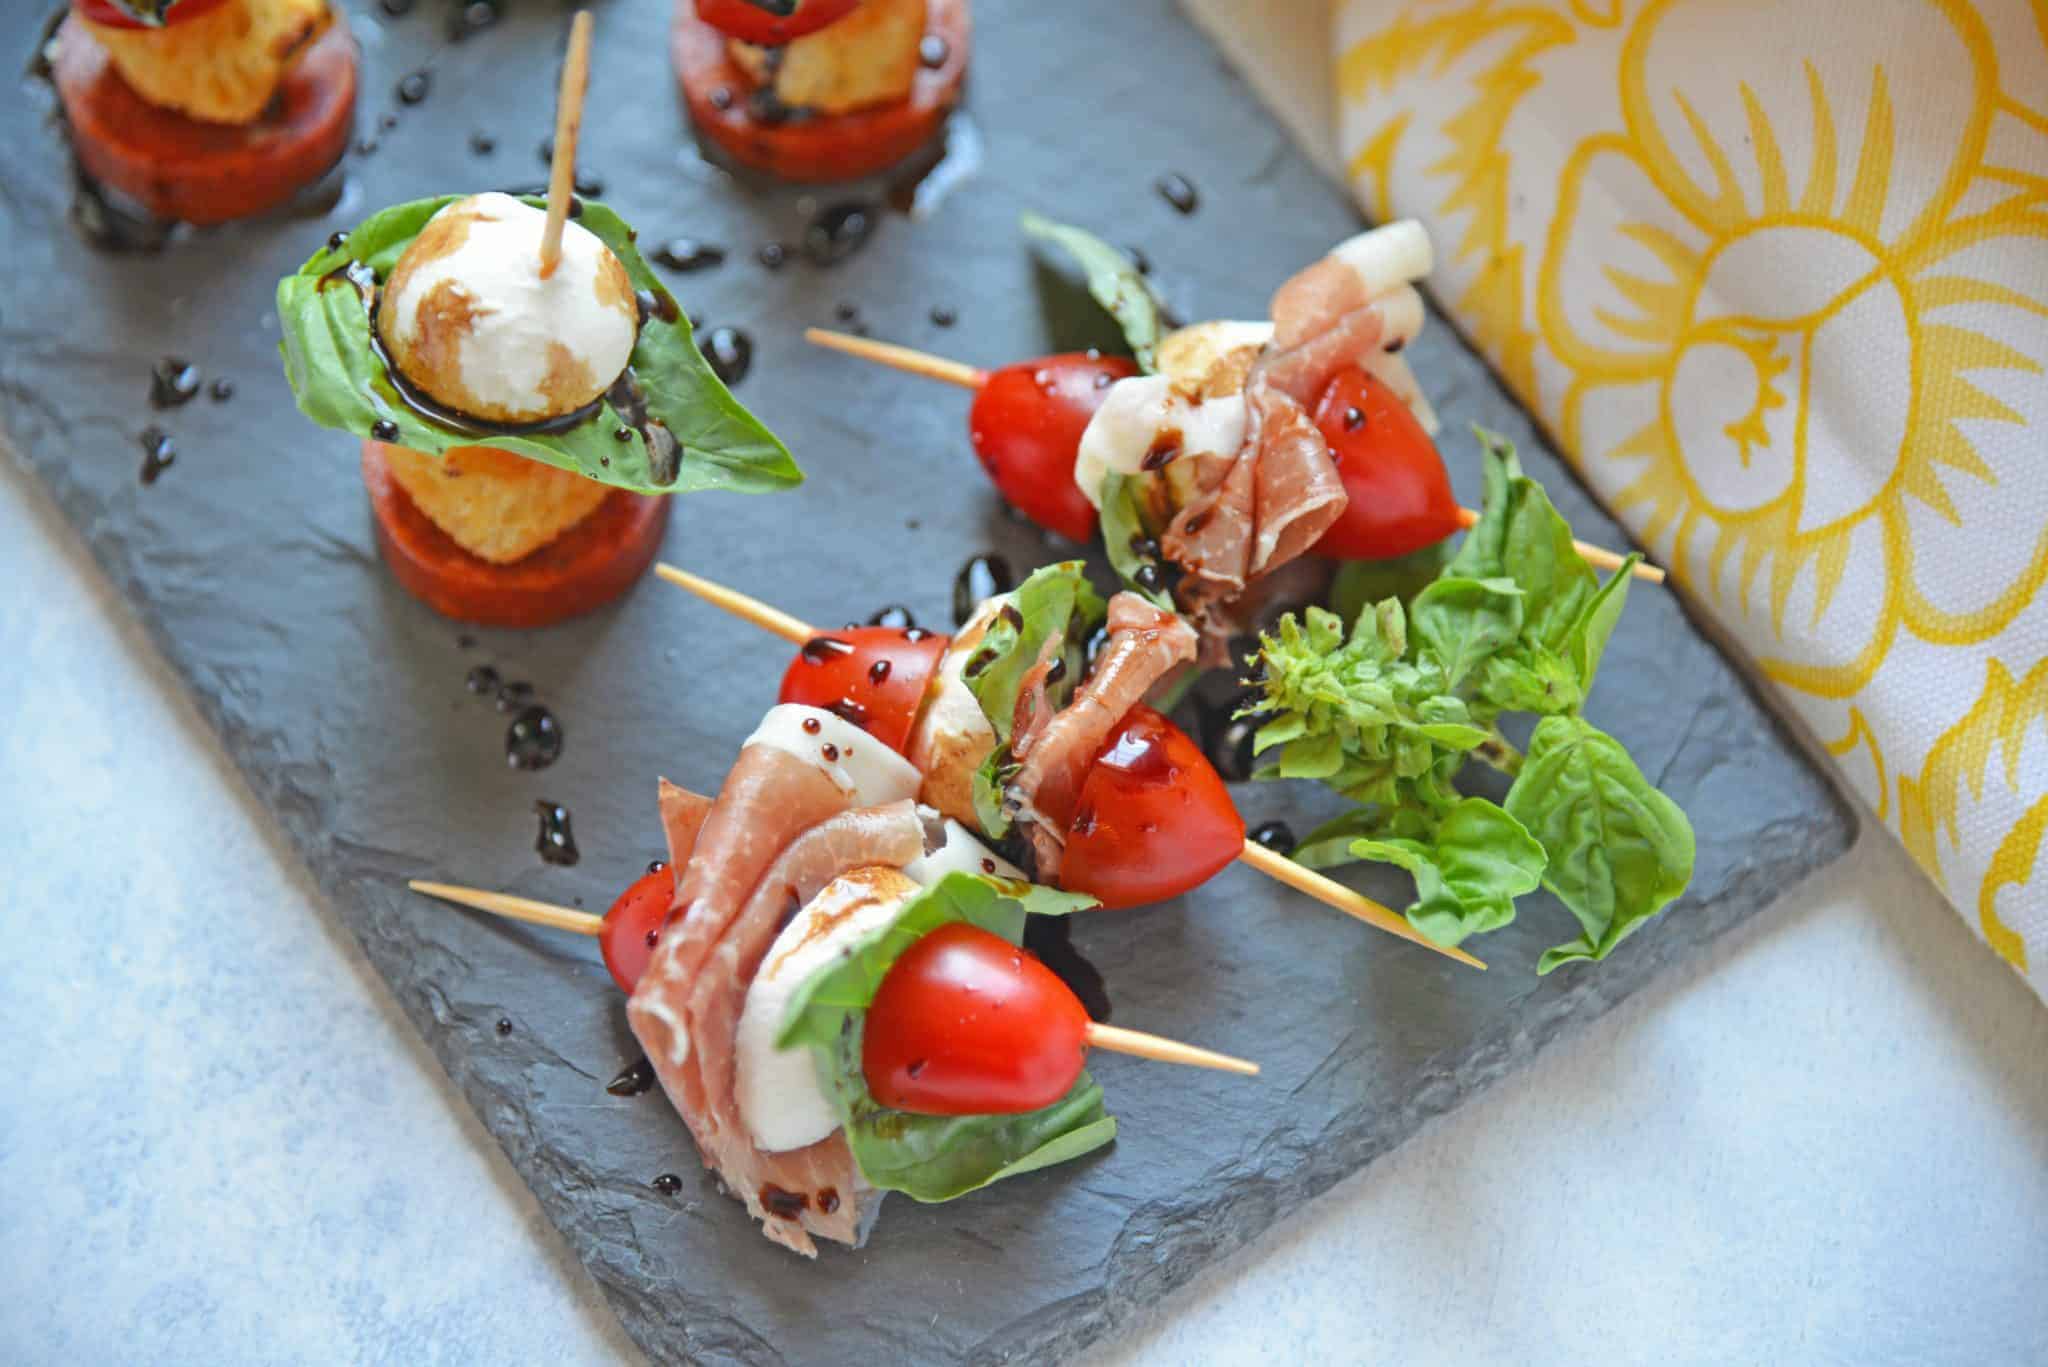 Caprese Skewers are the perfect party appetizer made with fresh mozzarella, basil, tomatoes, garlicky croutons, and zesty pepperoni, all drizzled with a tangy balsamic reduction sauce! #capresesalad #capreseappetizer www.savoryexperiments.com